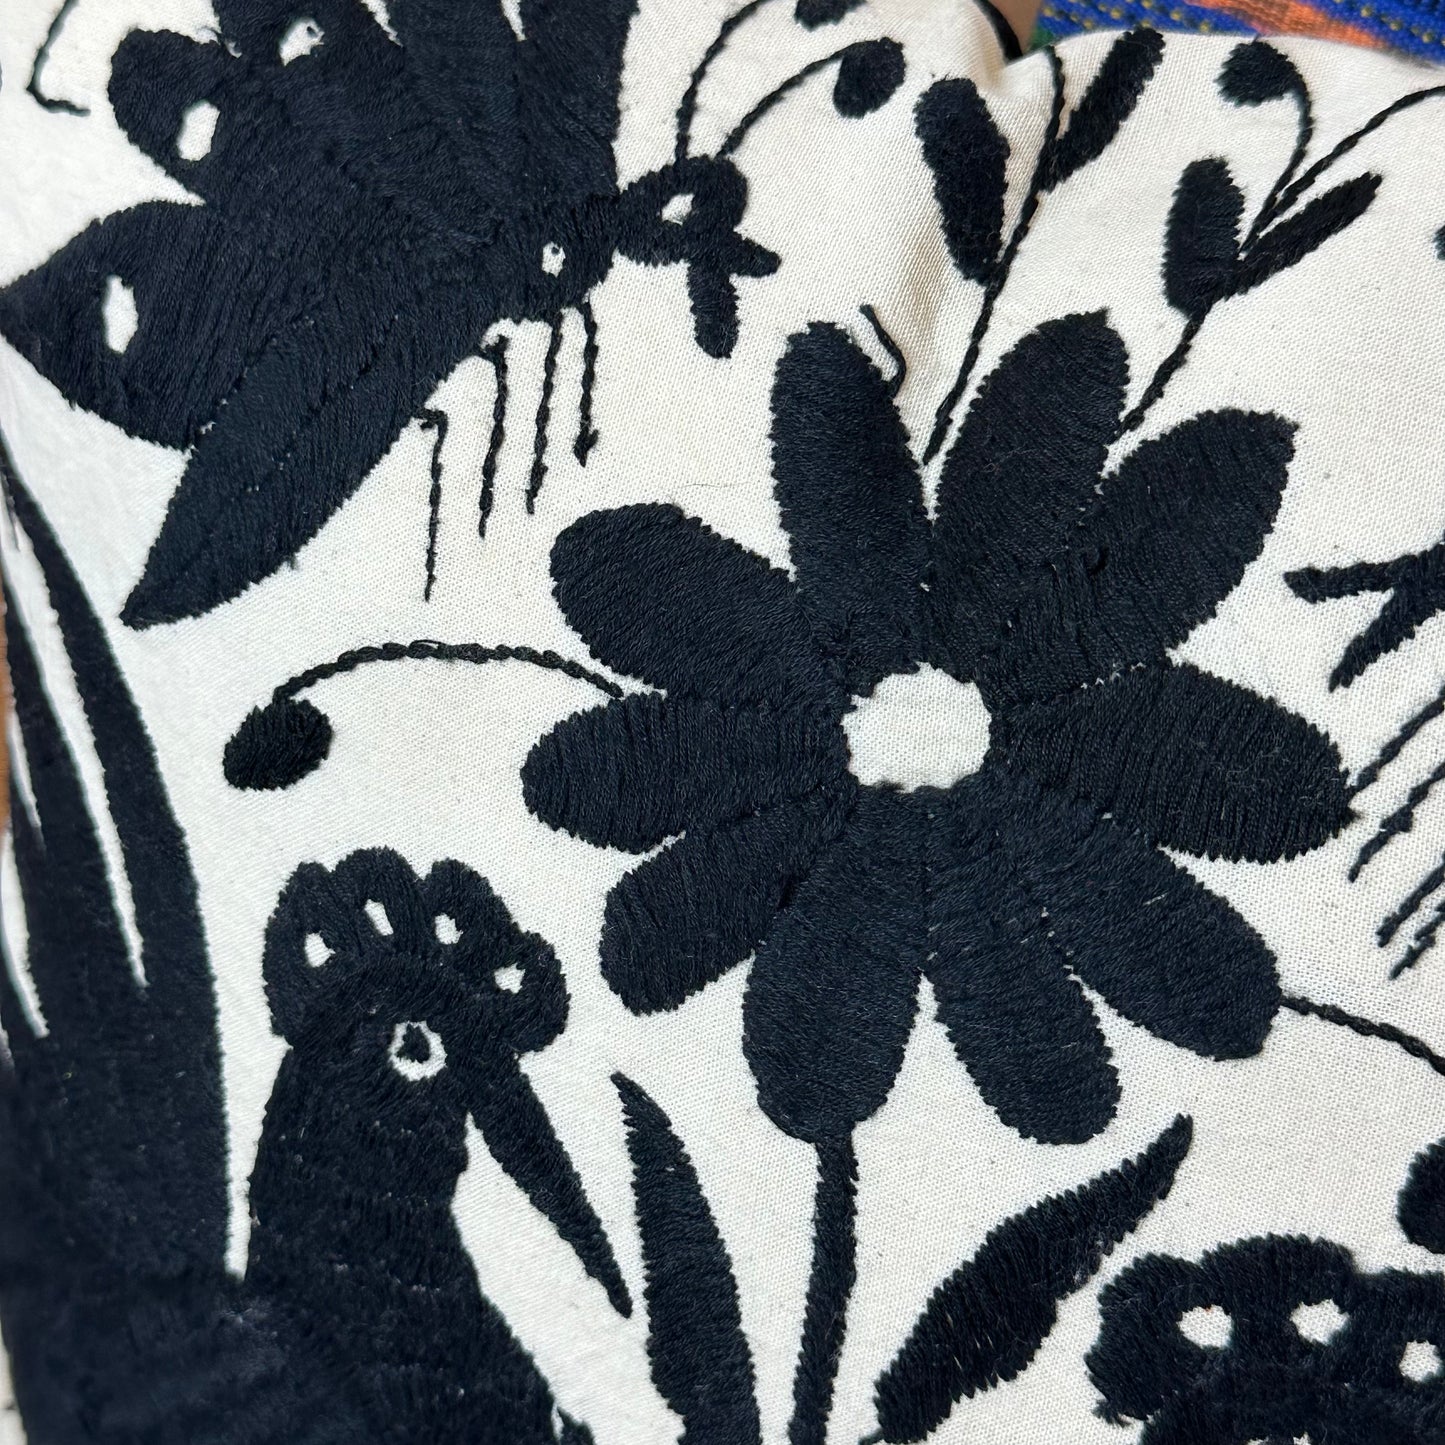 Otomi Embroidered Pillow Cover - Black & White Aves y Mariposa